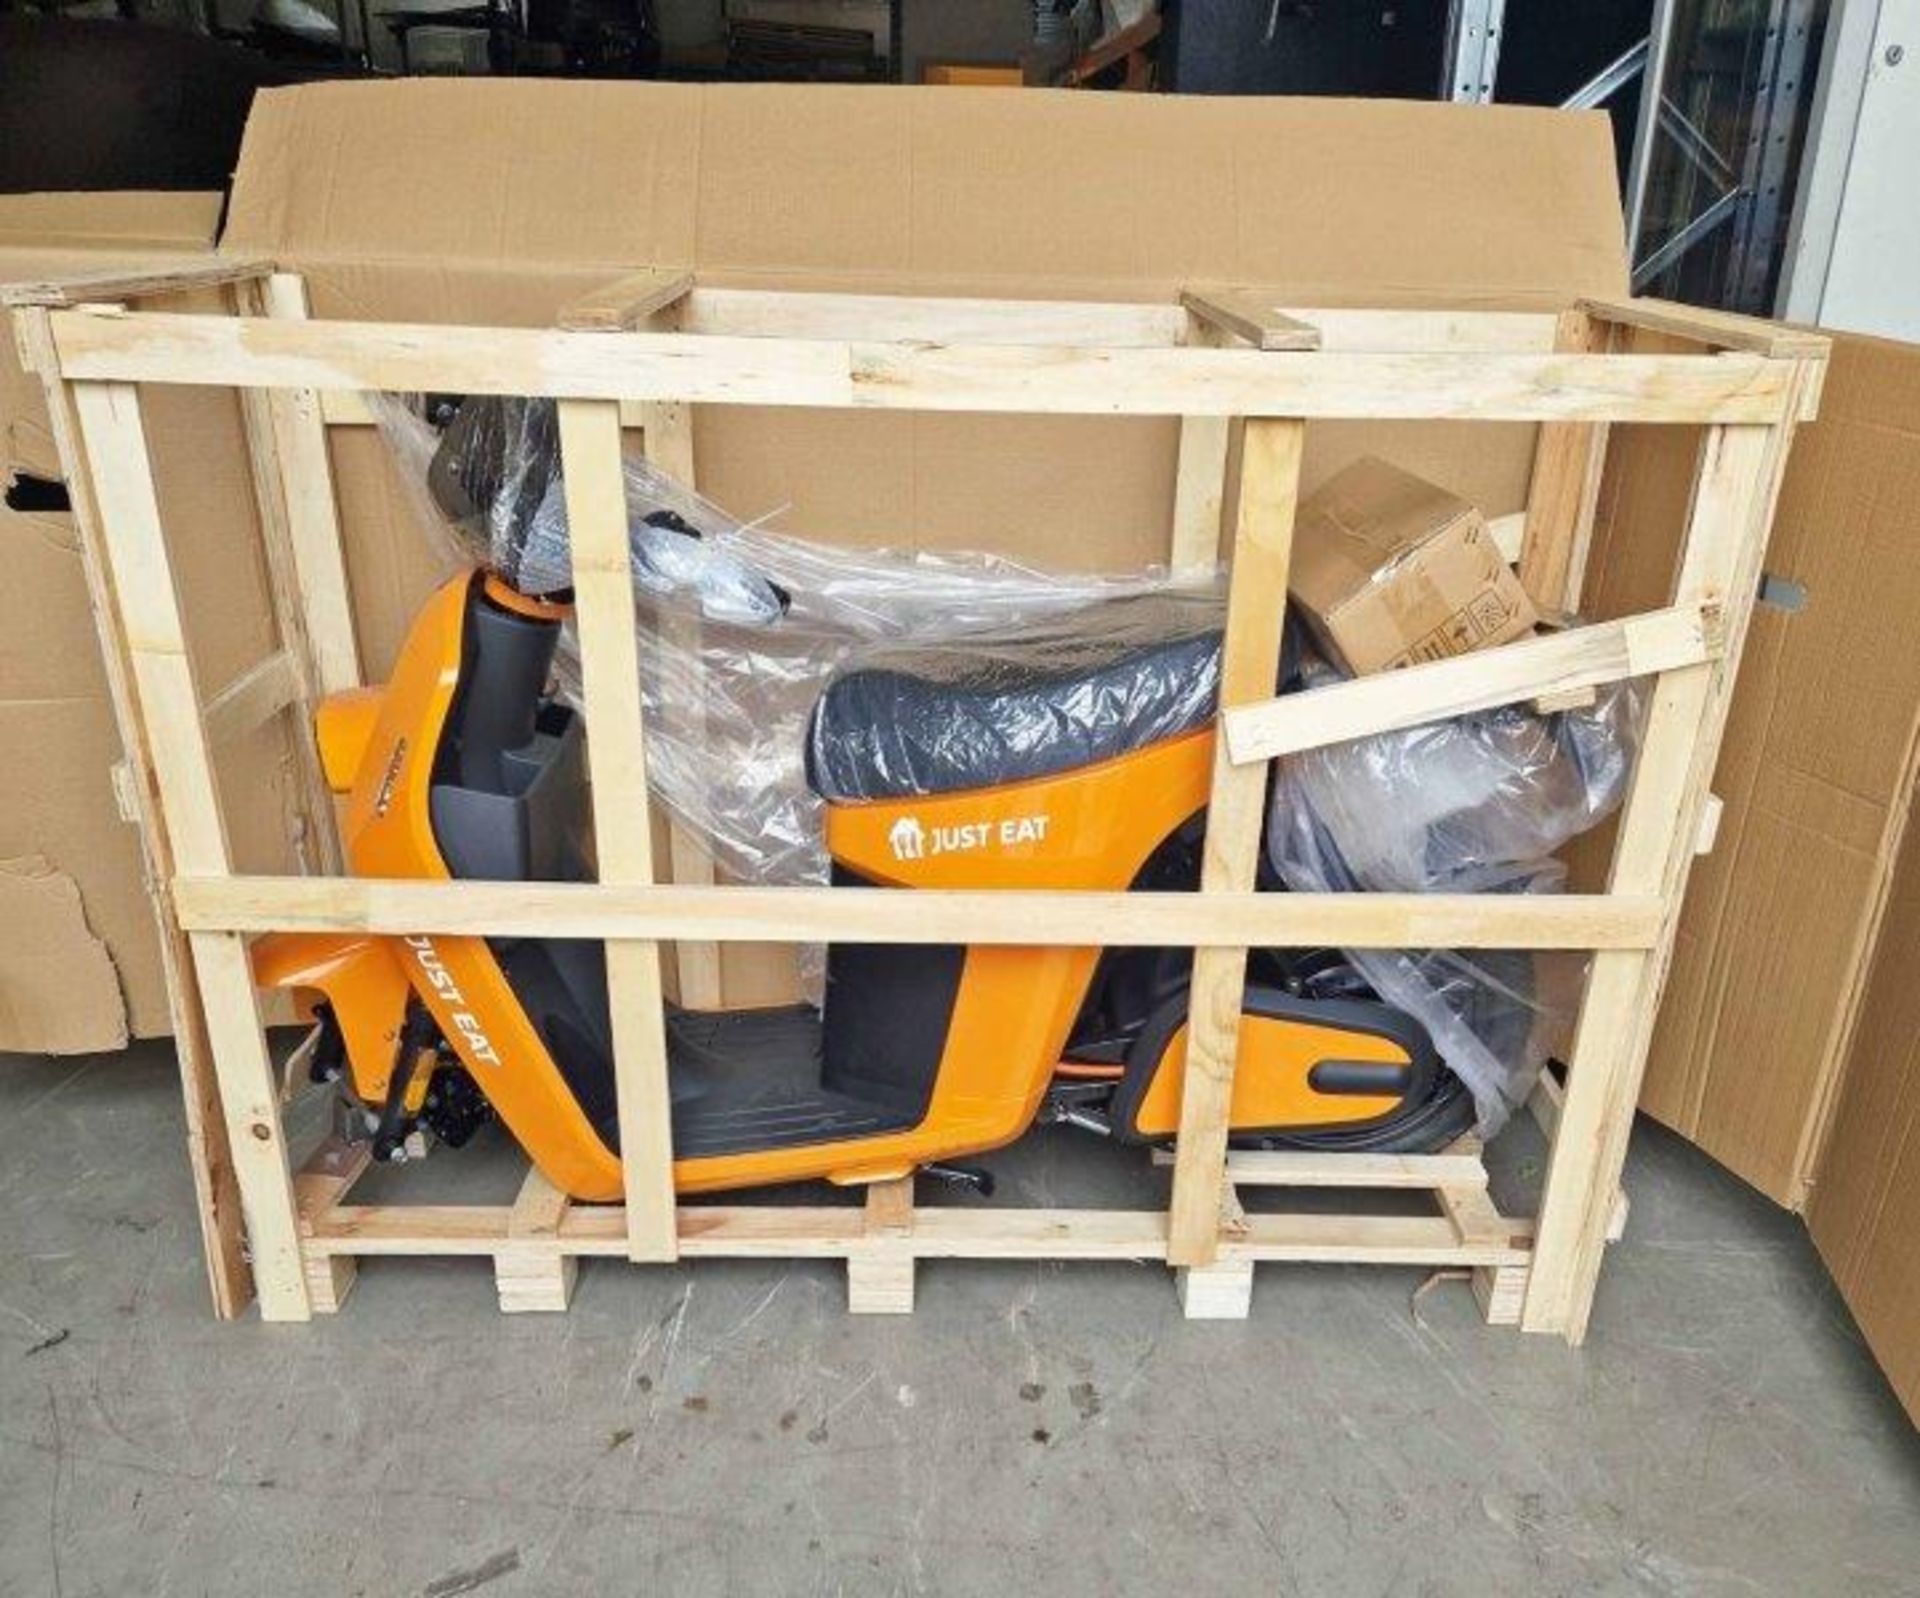 VMOTO VS2 L1e-b Electric Moped in Orange. Boxed, Unused and Unregistered, requiring some assembly, - Image 10 of 11